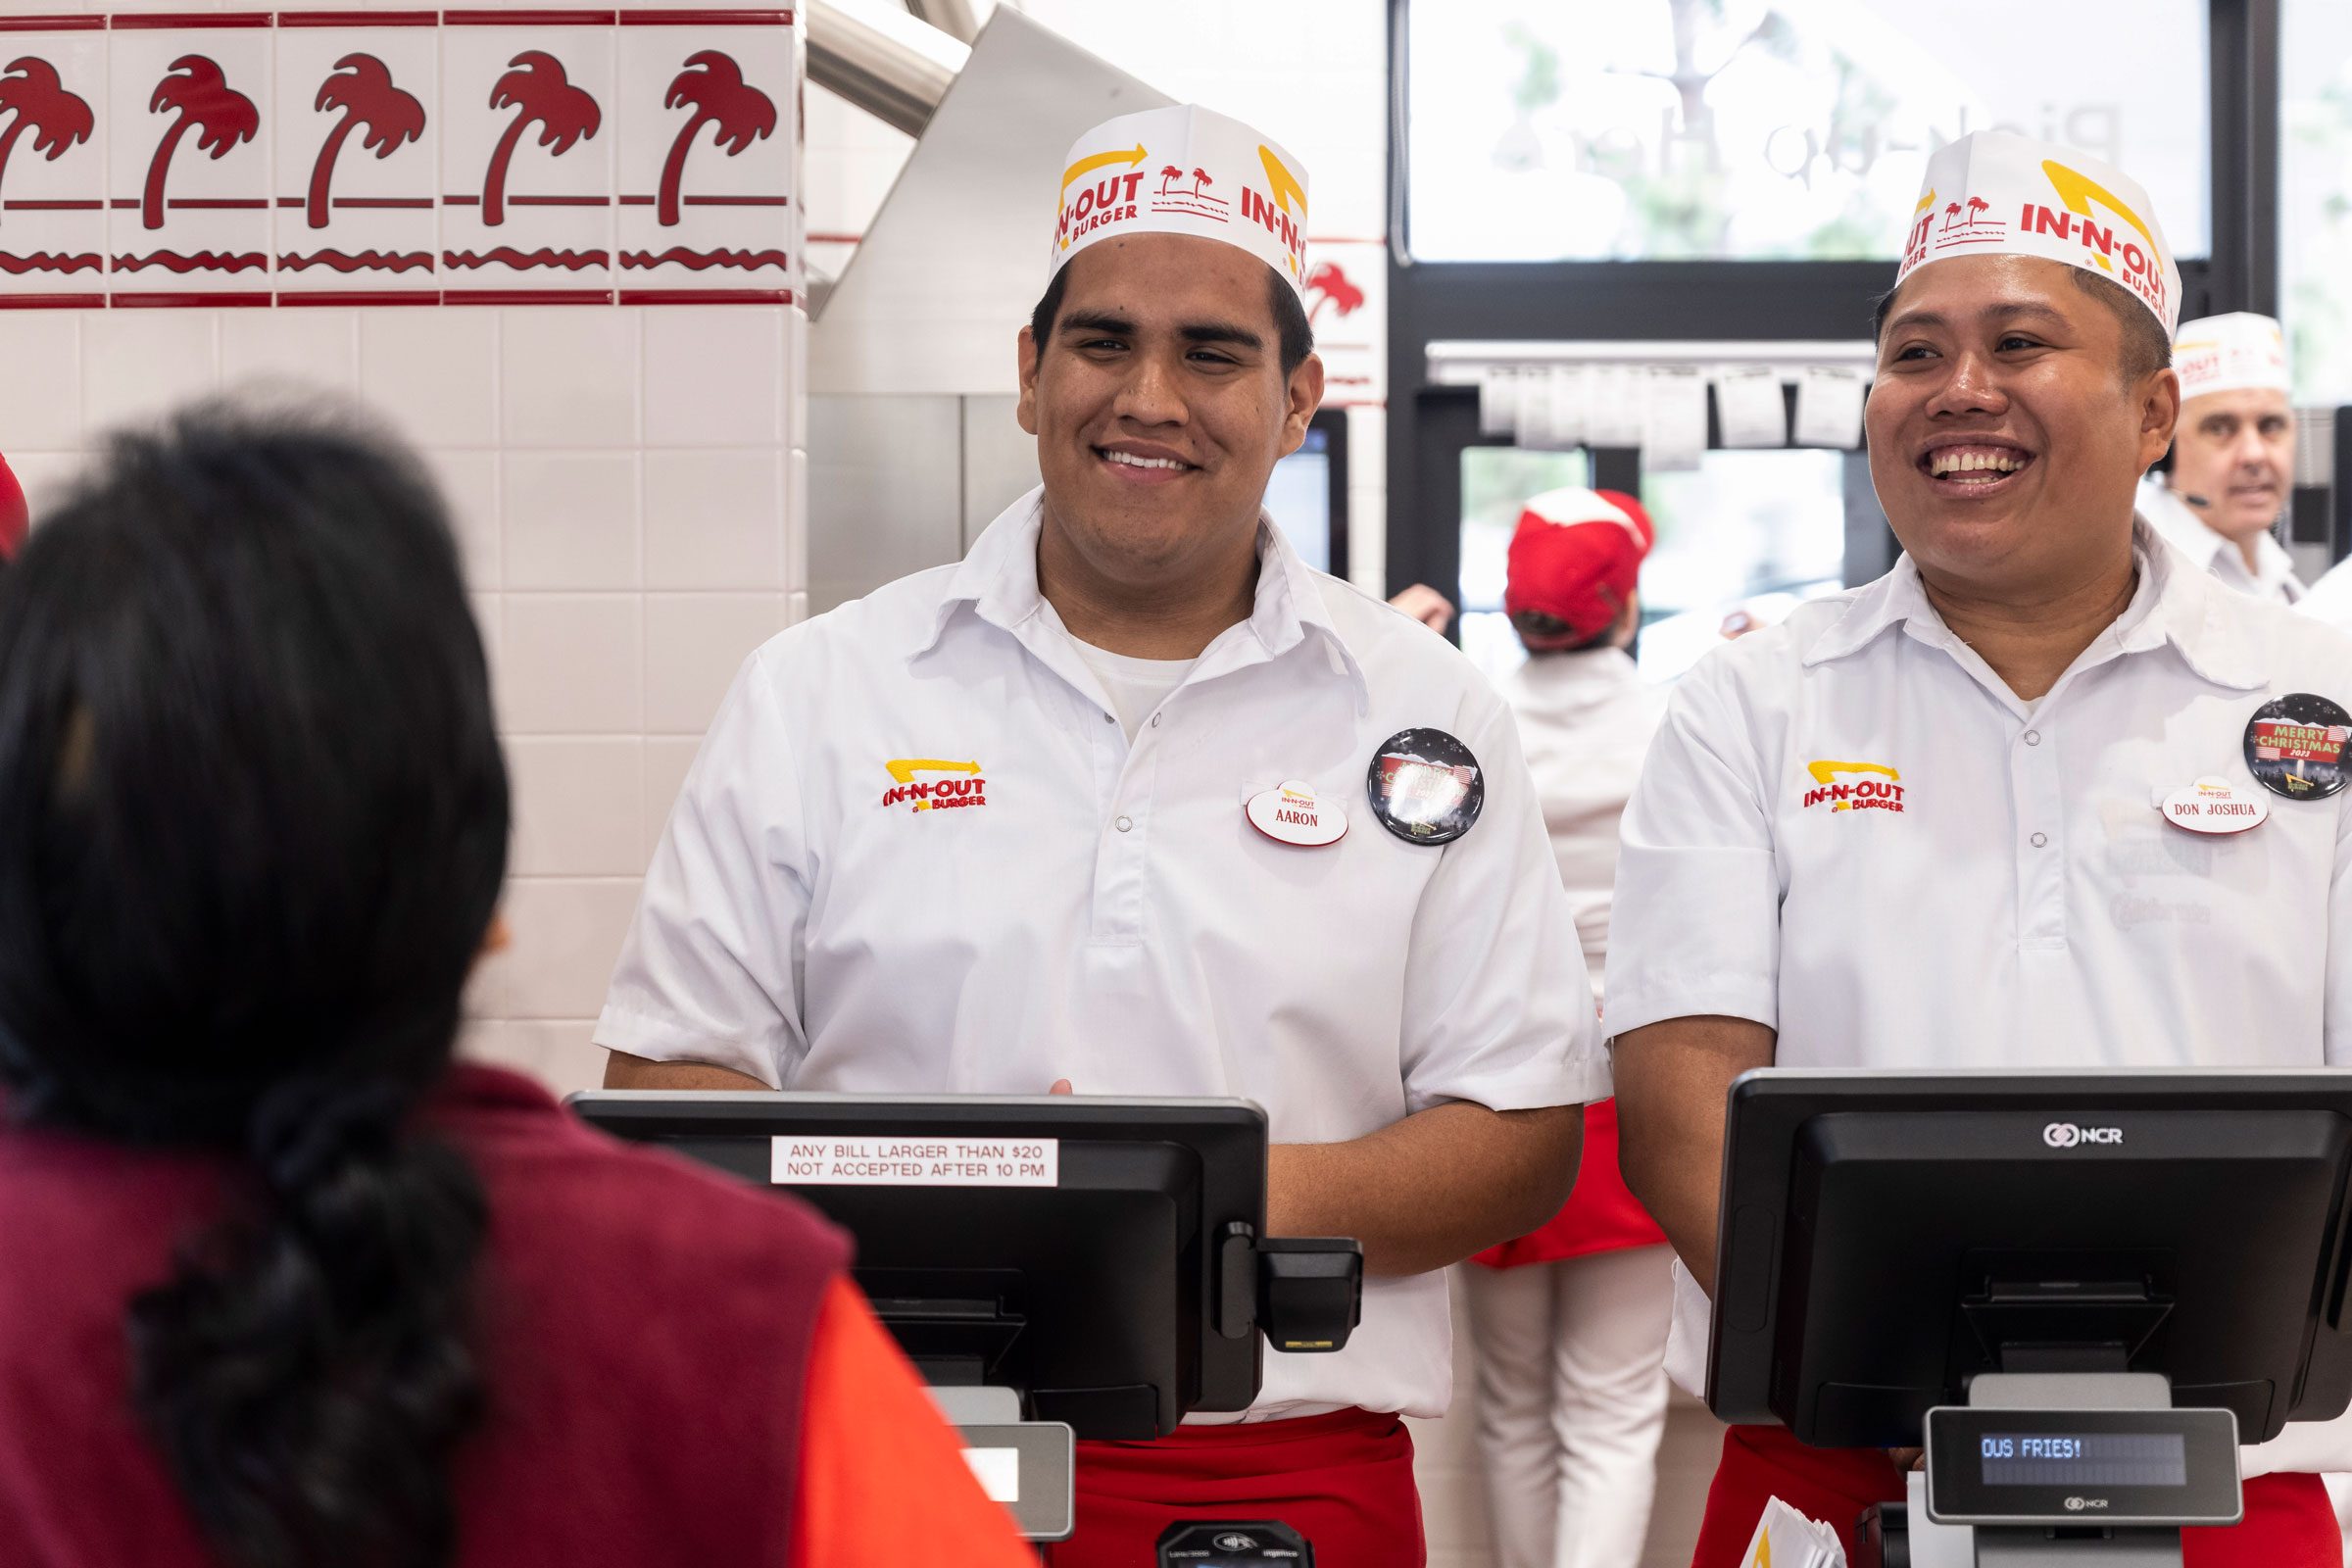 In-N-Out Burger employees laughing as customer orders